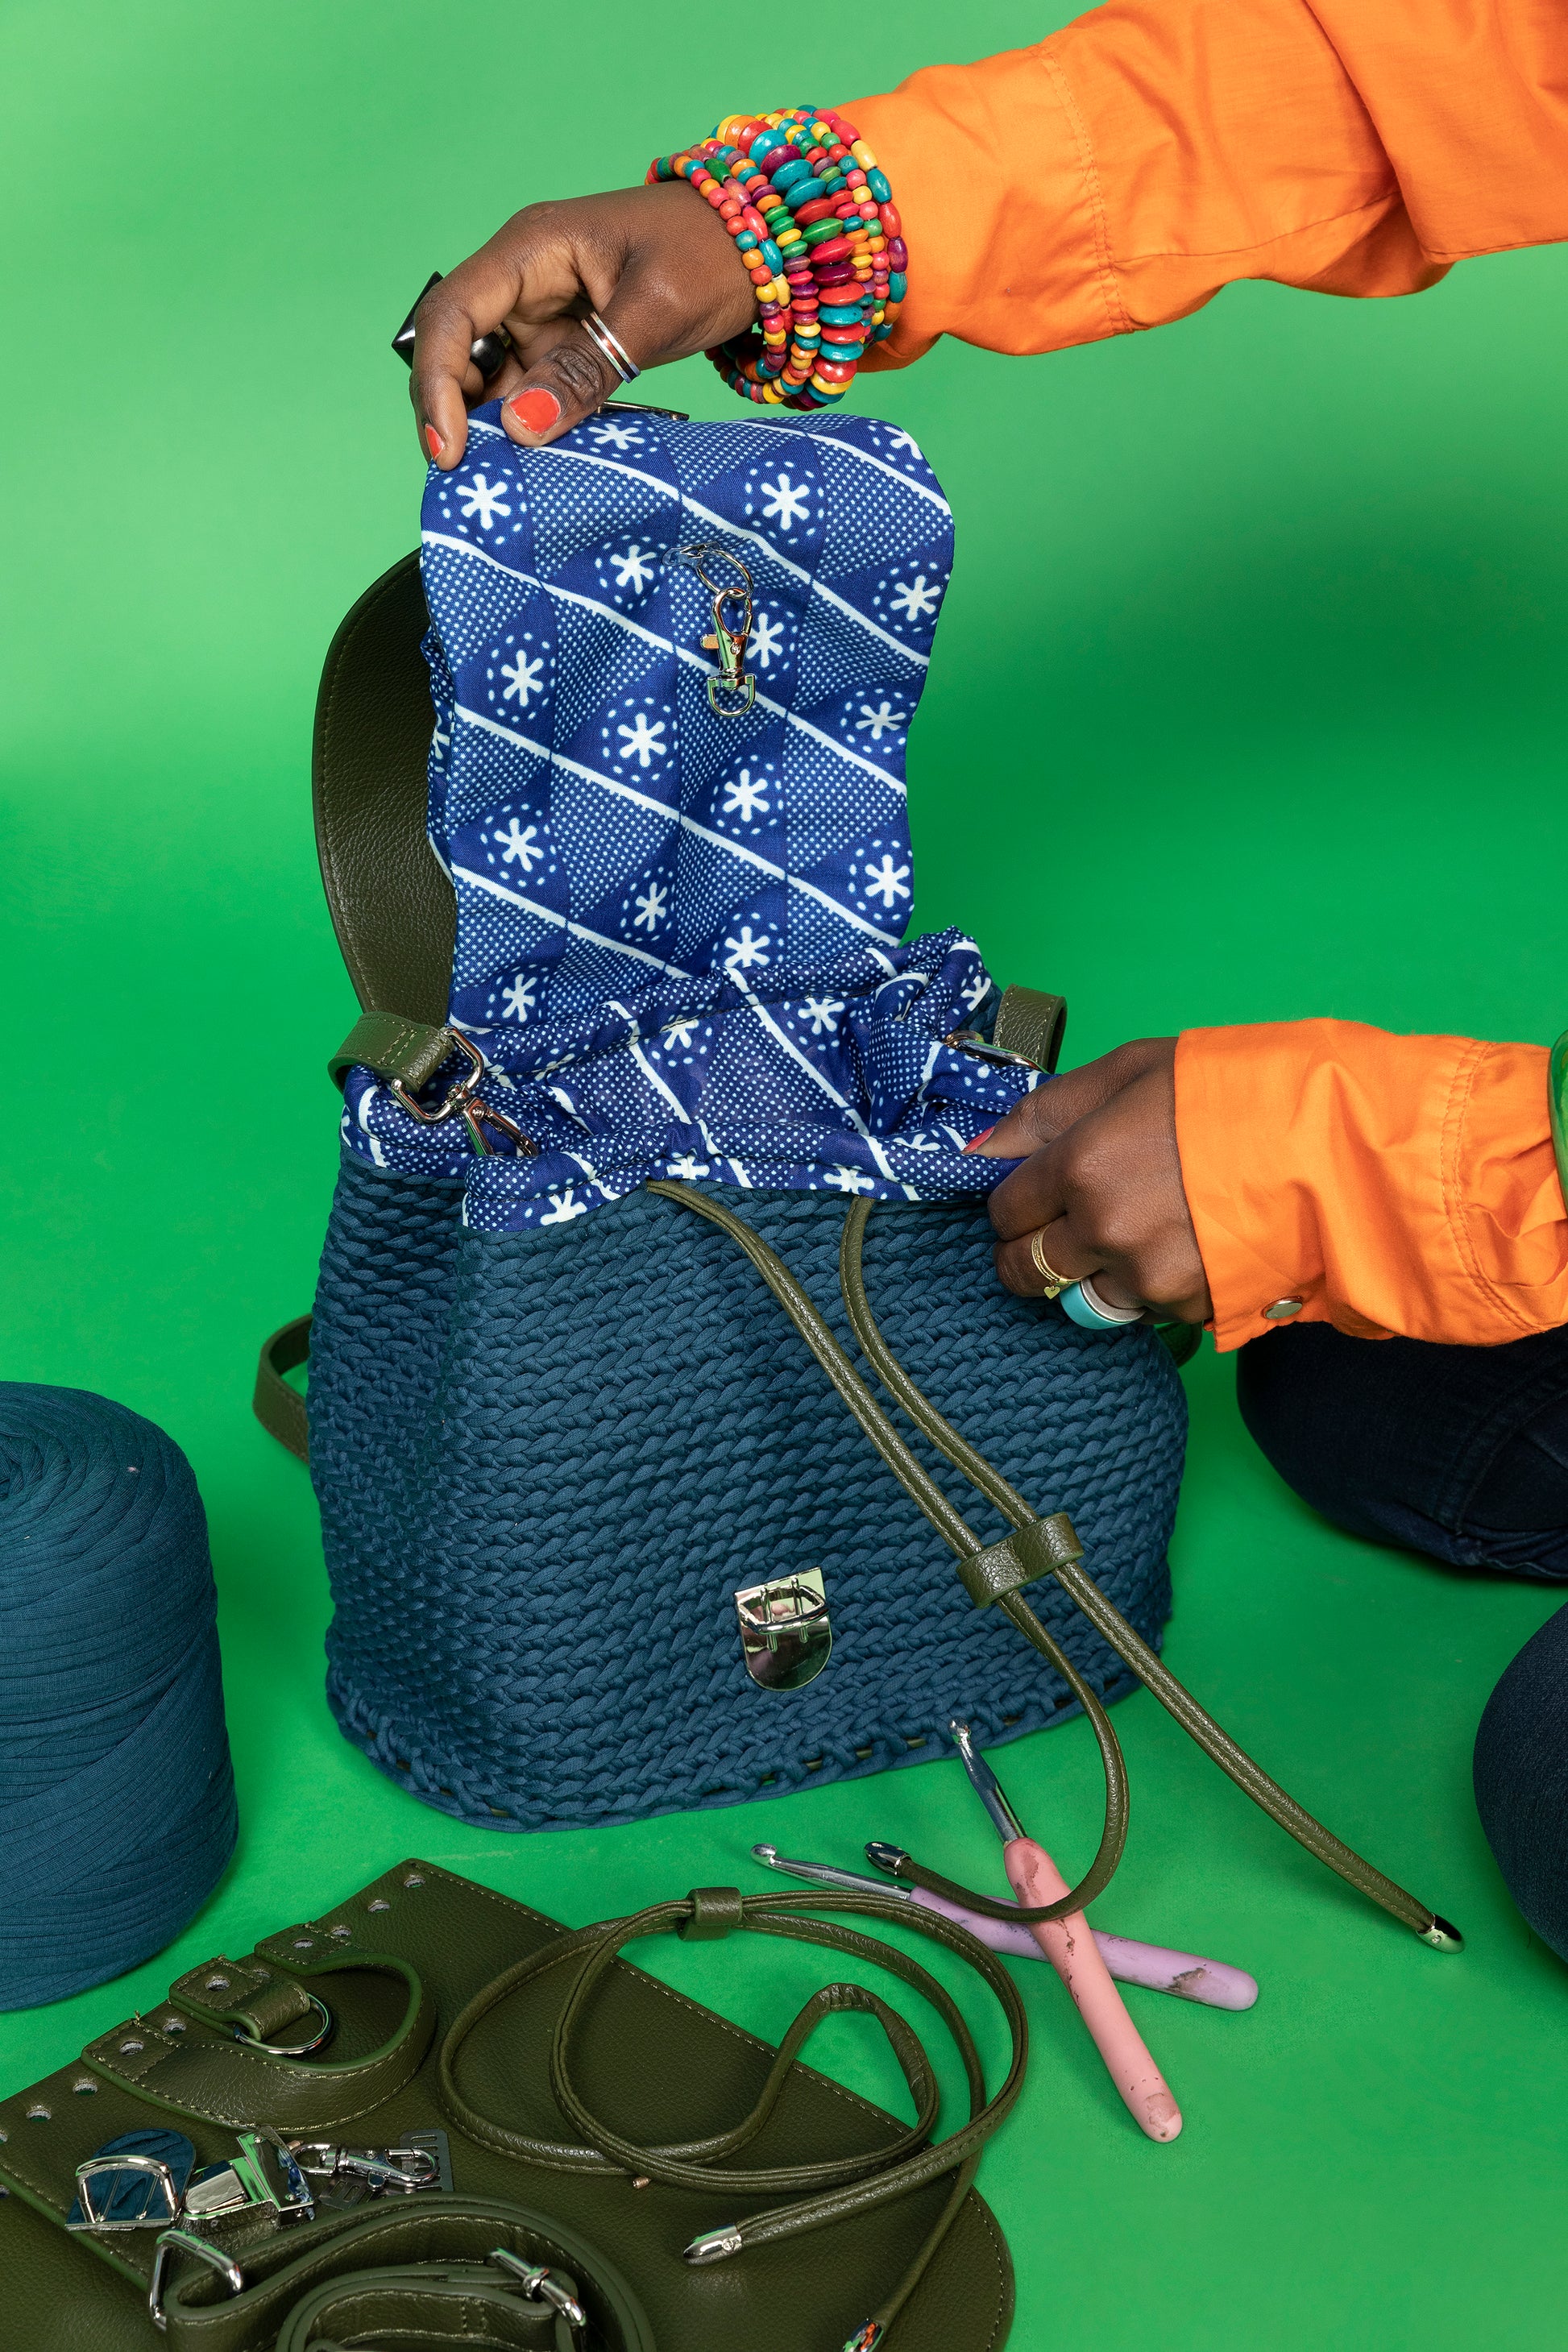 crocheted, dark blue and forest green bag, with an African style print. opened showing compartments.